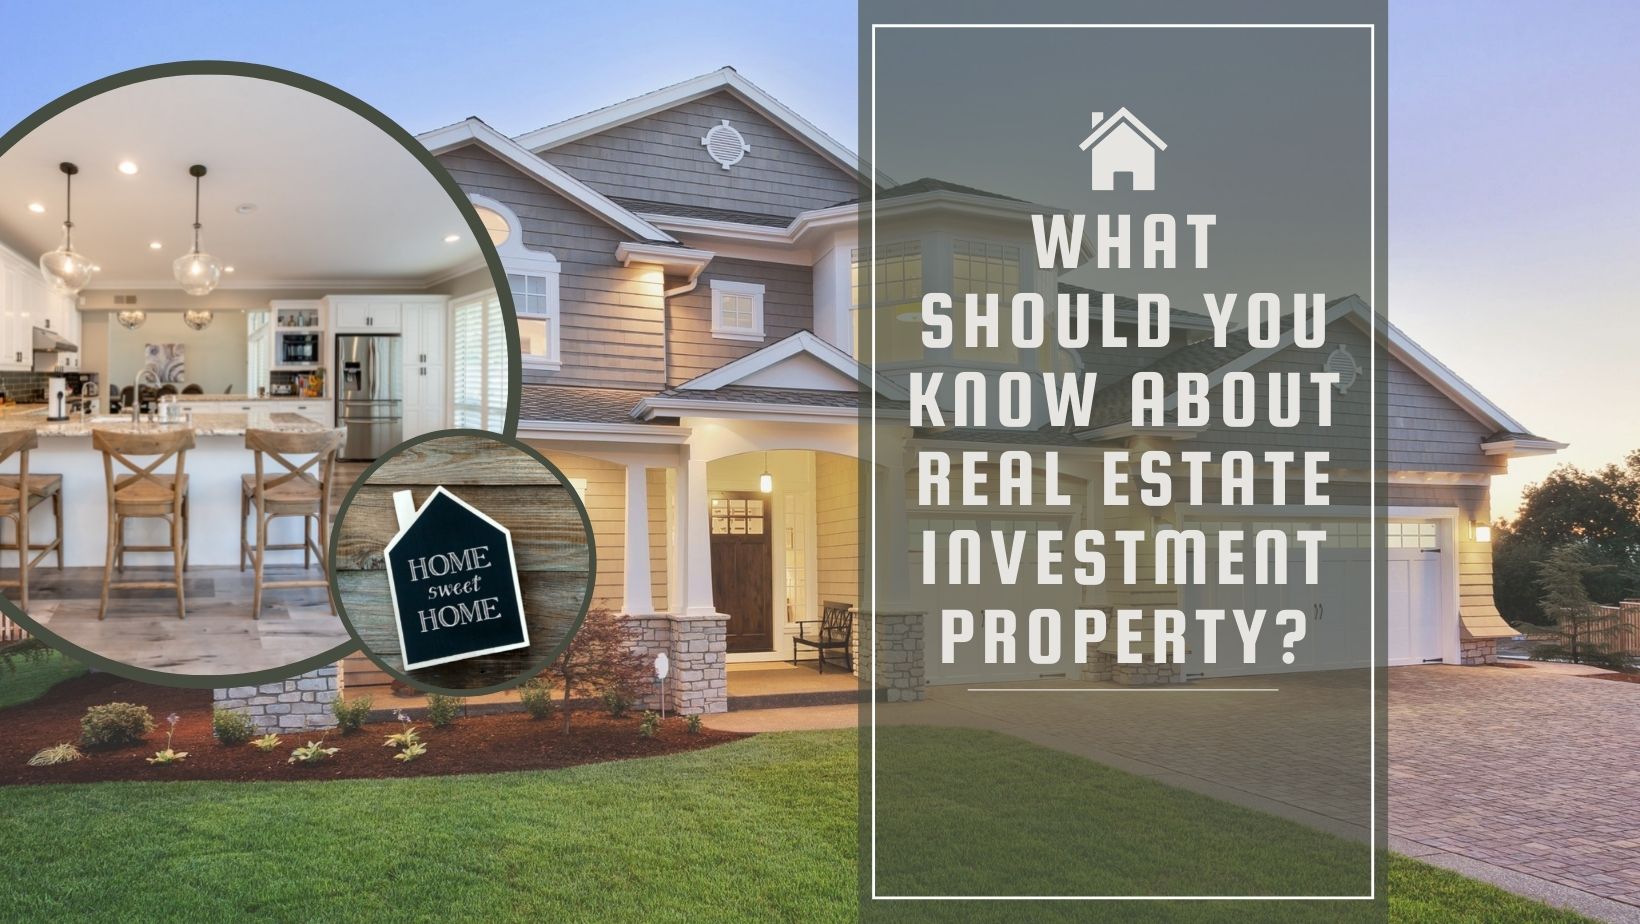 What Should You Know about Real Estate Investment Property?